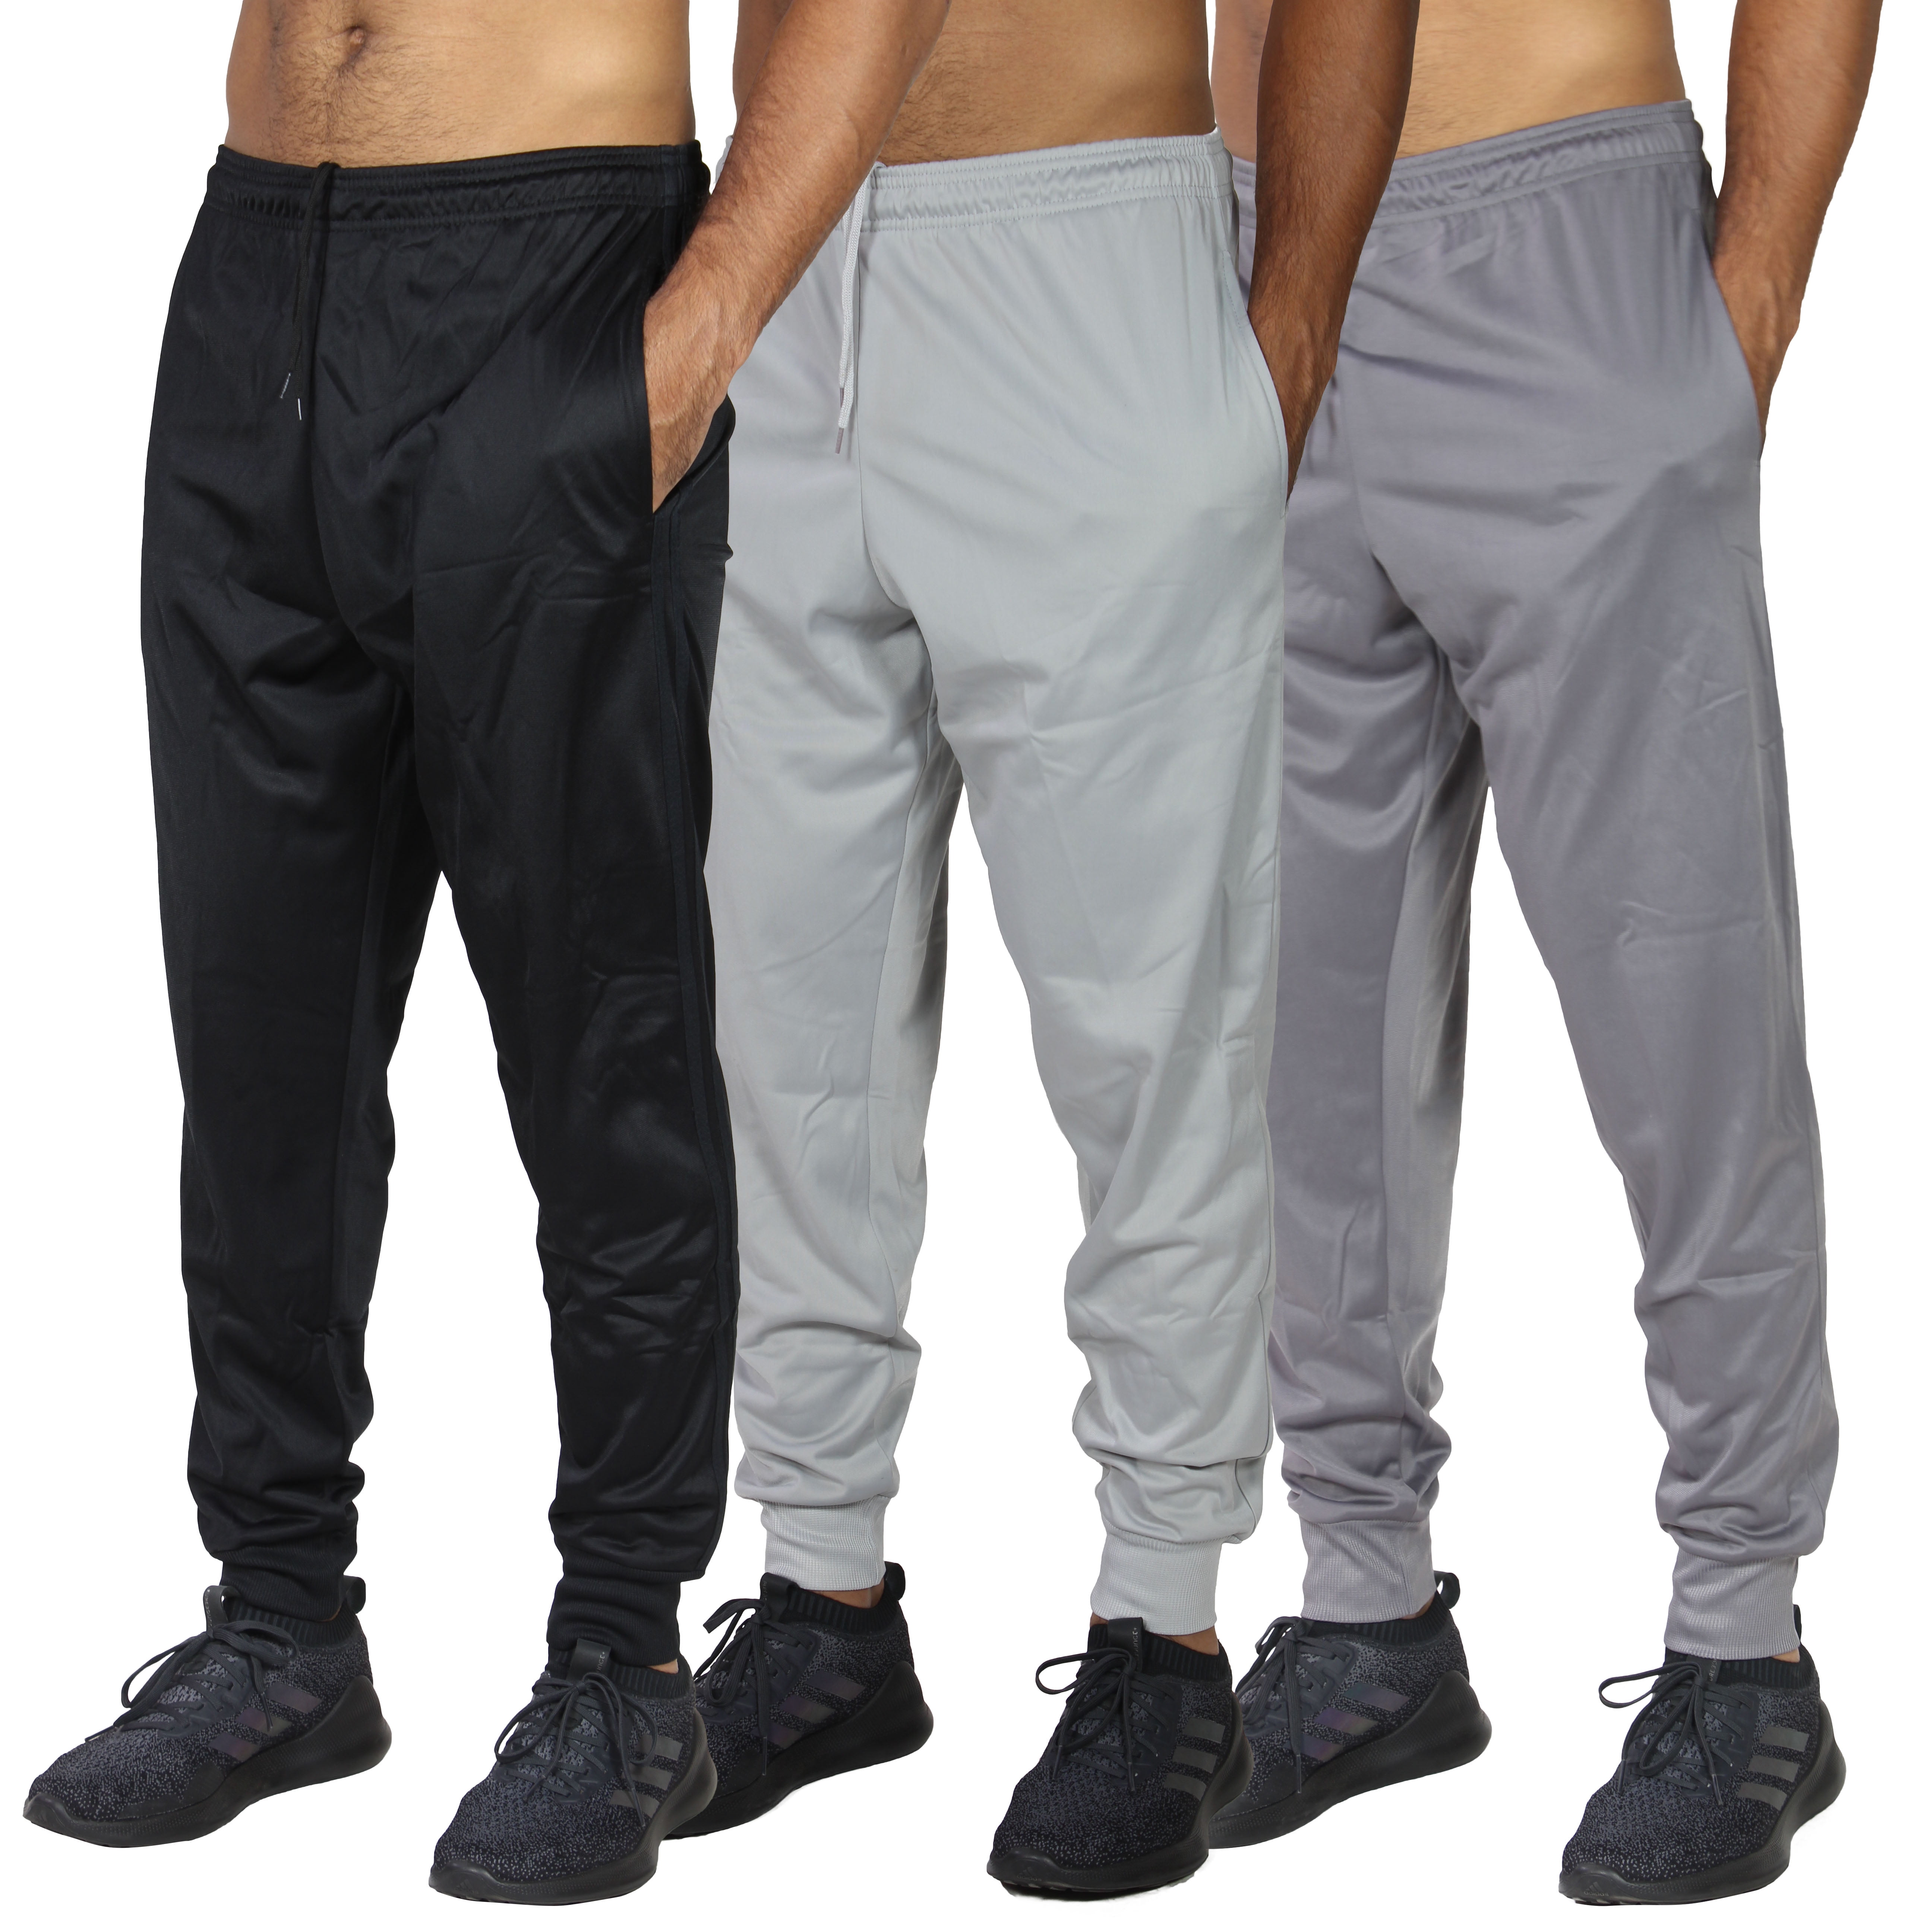 Real Essentials 3 Pack Boys Active Athletic Casual Jogger Sweatpants with Pockets